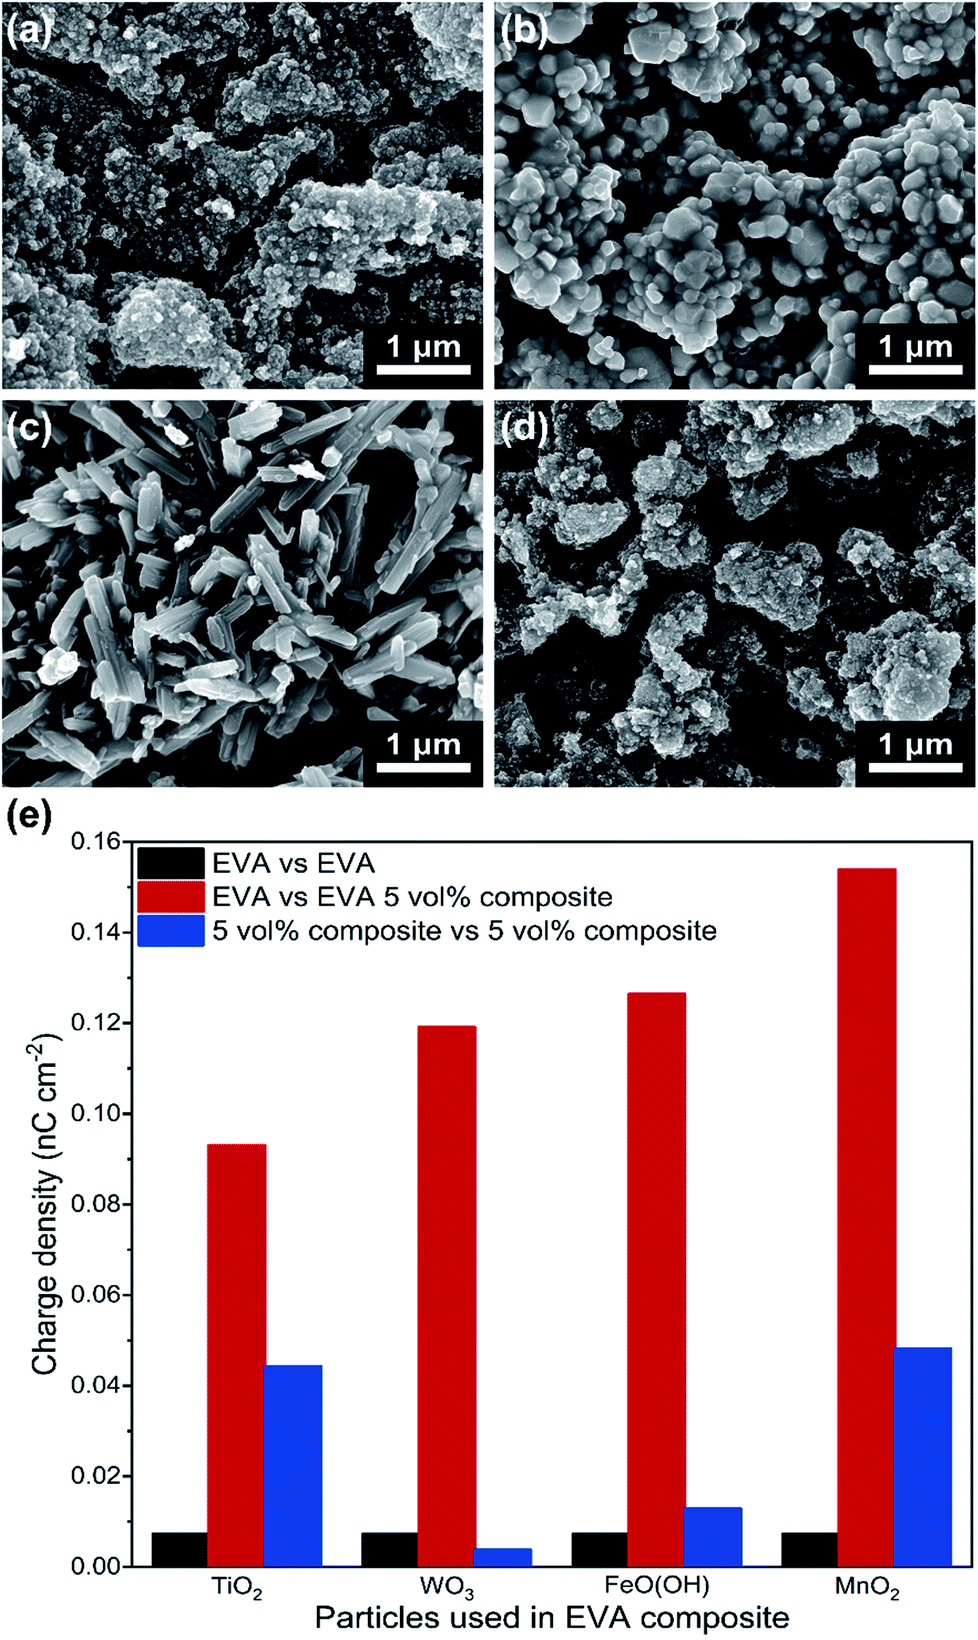 Triboelectrification Of Nanocomposites Using Identical Polymer Matrixes With Different Concentrations Of Nanoparticle Fillers Journal Of Materials Chemistry A Rsc Publishing Doi 10 1039 D0taa